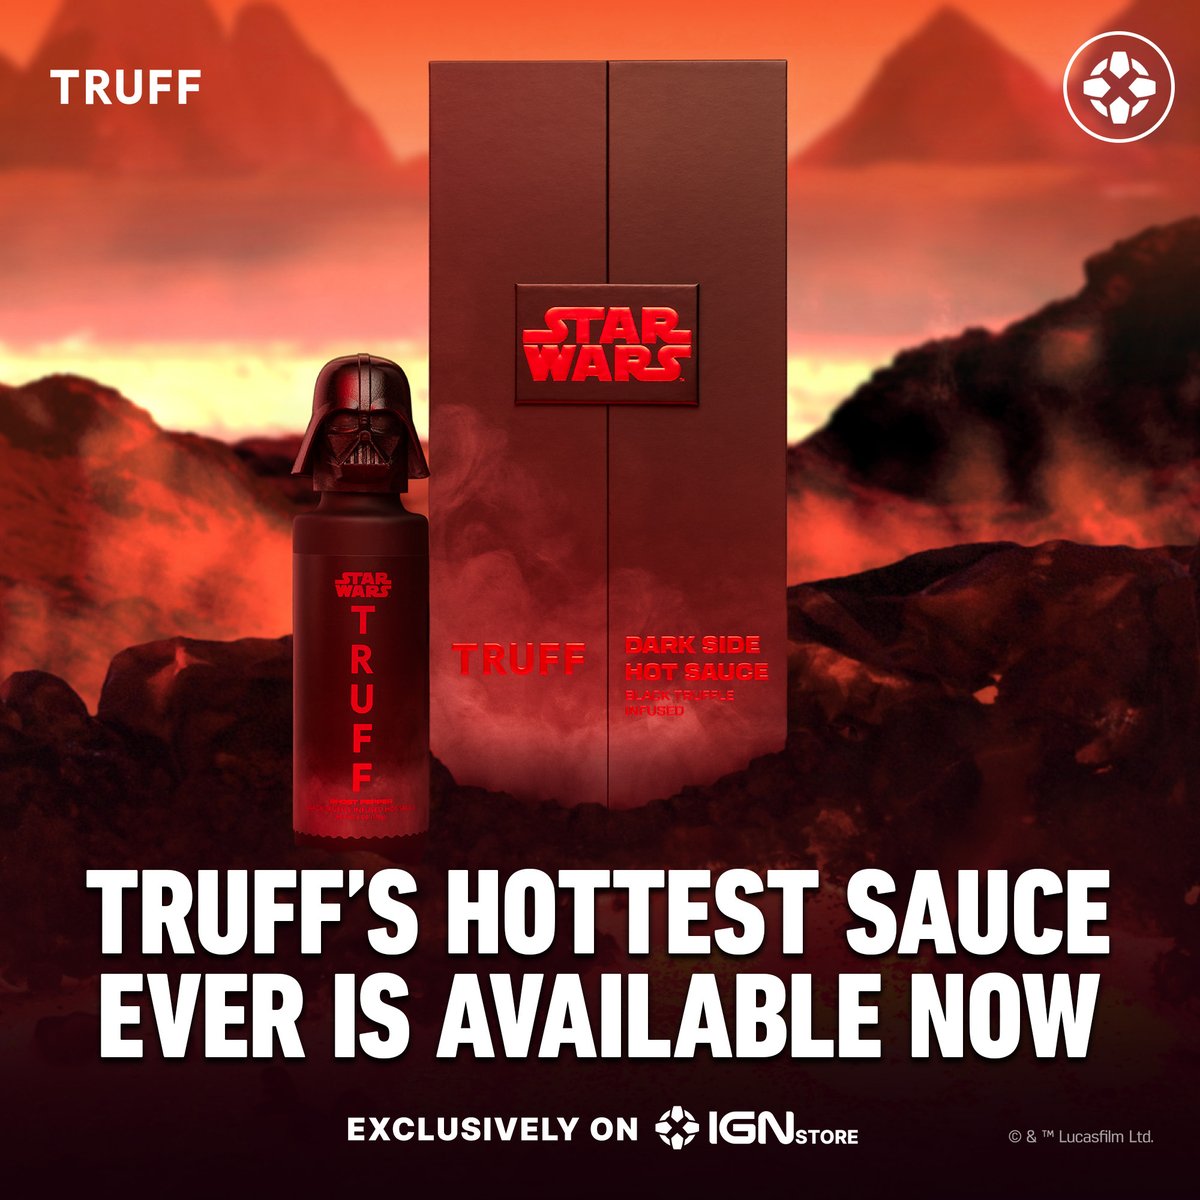 STAR WARS™ DARK SIDE HOT SAUCE marks TRUFF’s hottest hot sauce to date, showcasing a rich symphony of flavors that surpasses anything the brand has crafted before. And it's available exclusively on IGN Store, while supplies last! ign.com/TRUFF